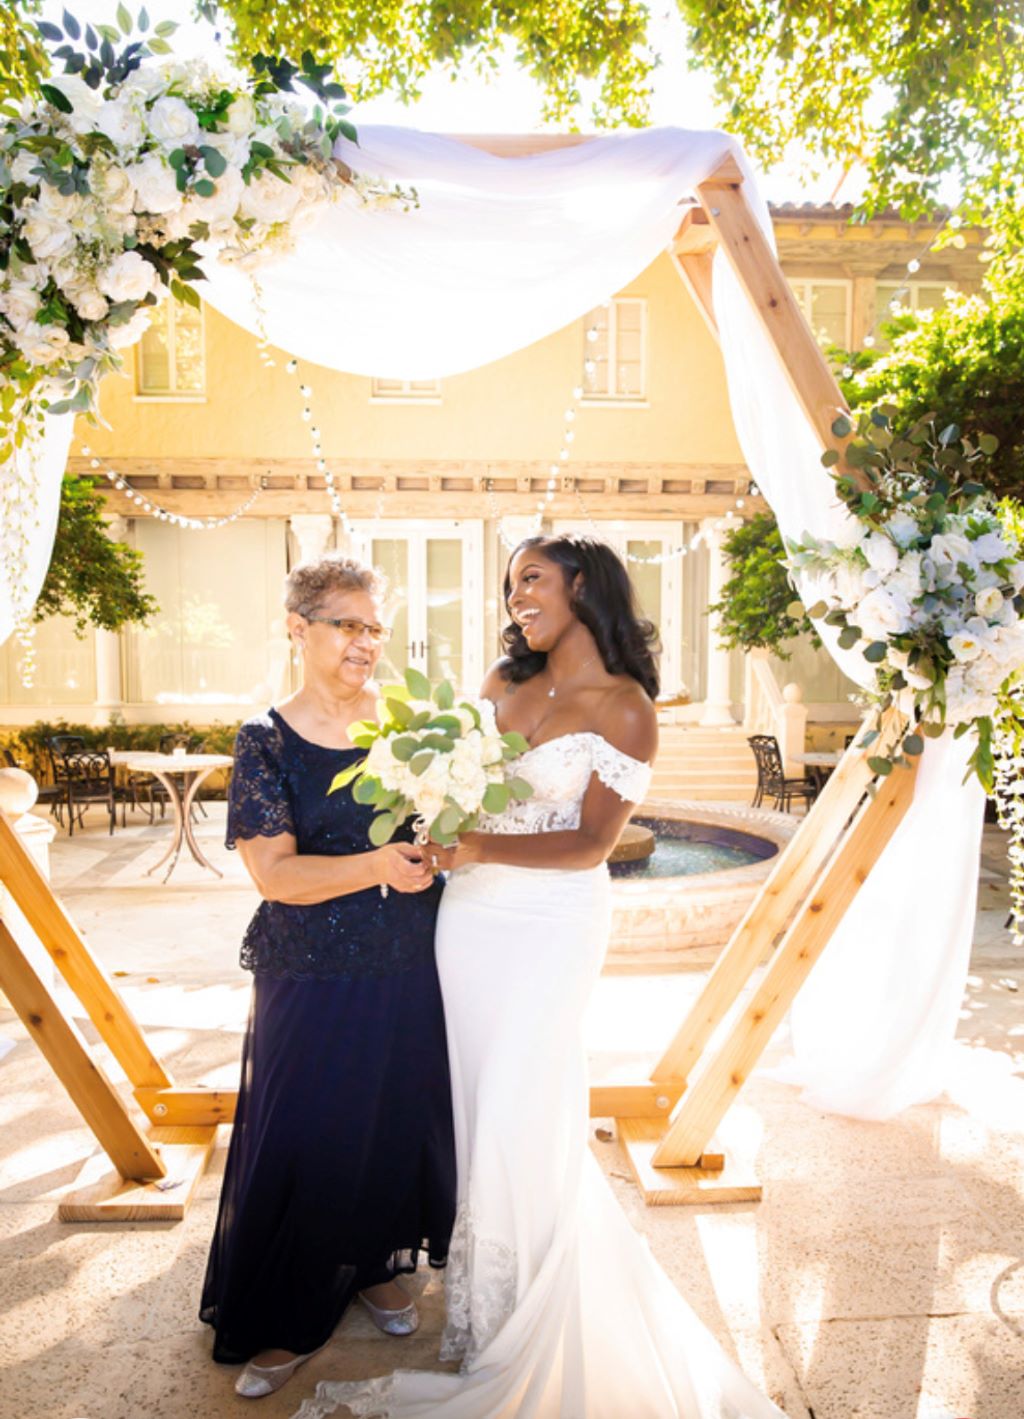 Bride and her aunt on wedding day